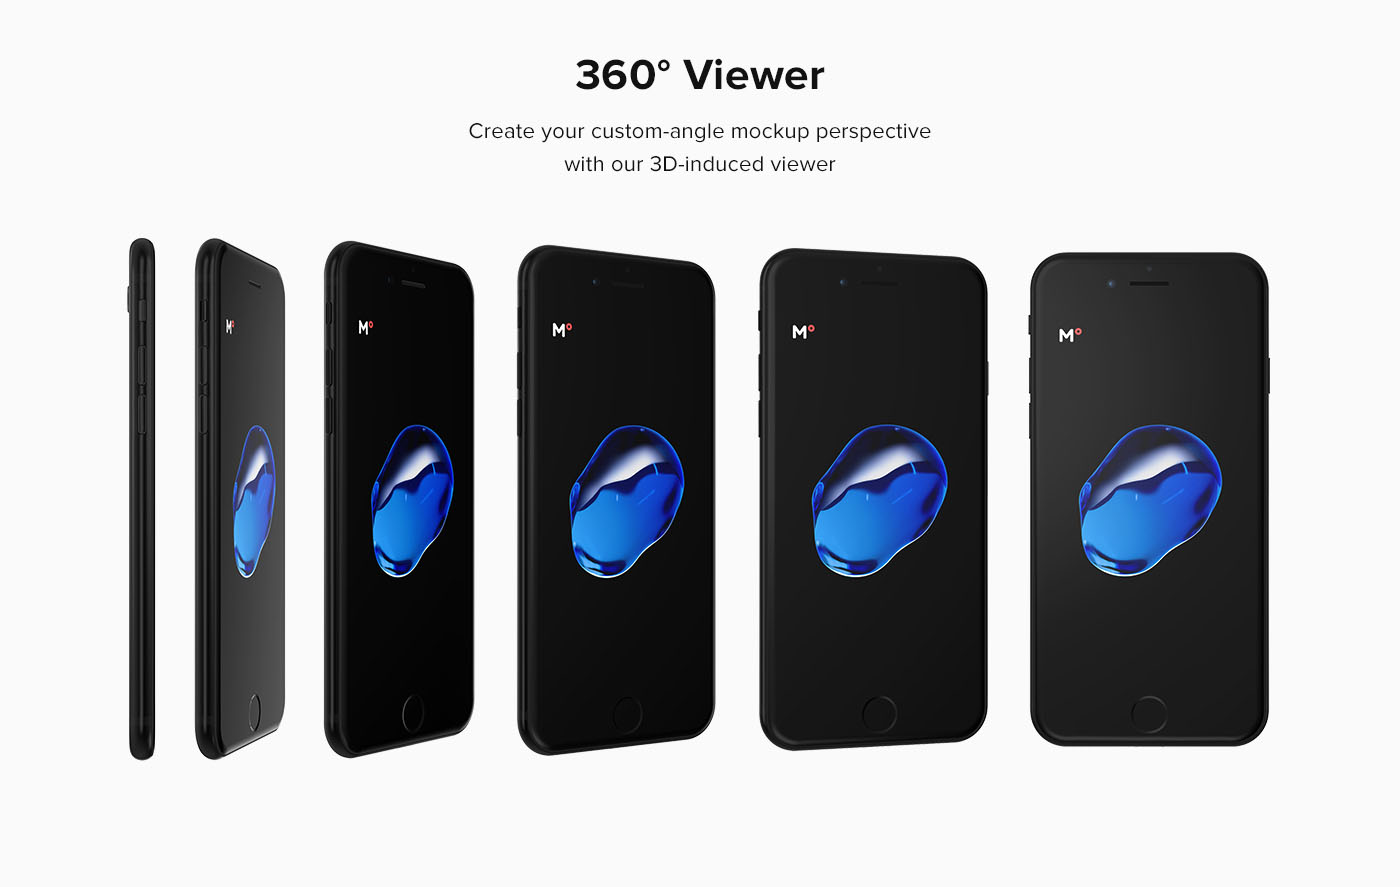 Download 40 Awesome Apple iPhone, iPad and iMac PSD Mockups! | Free ...